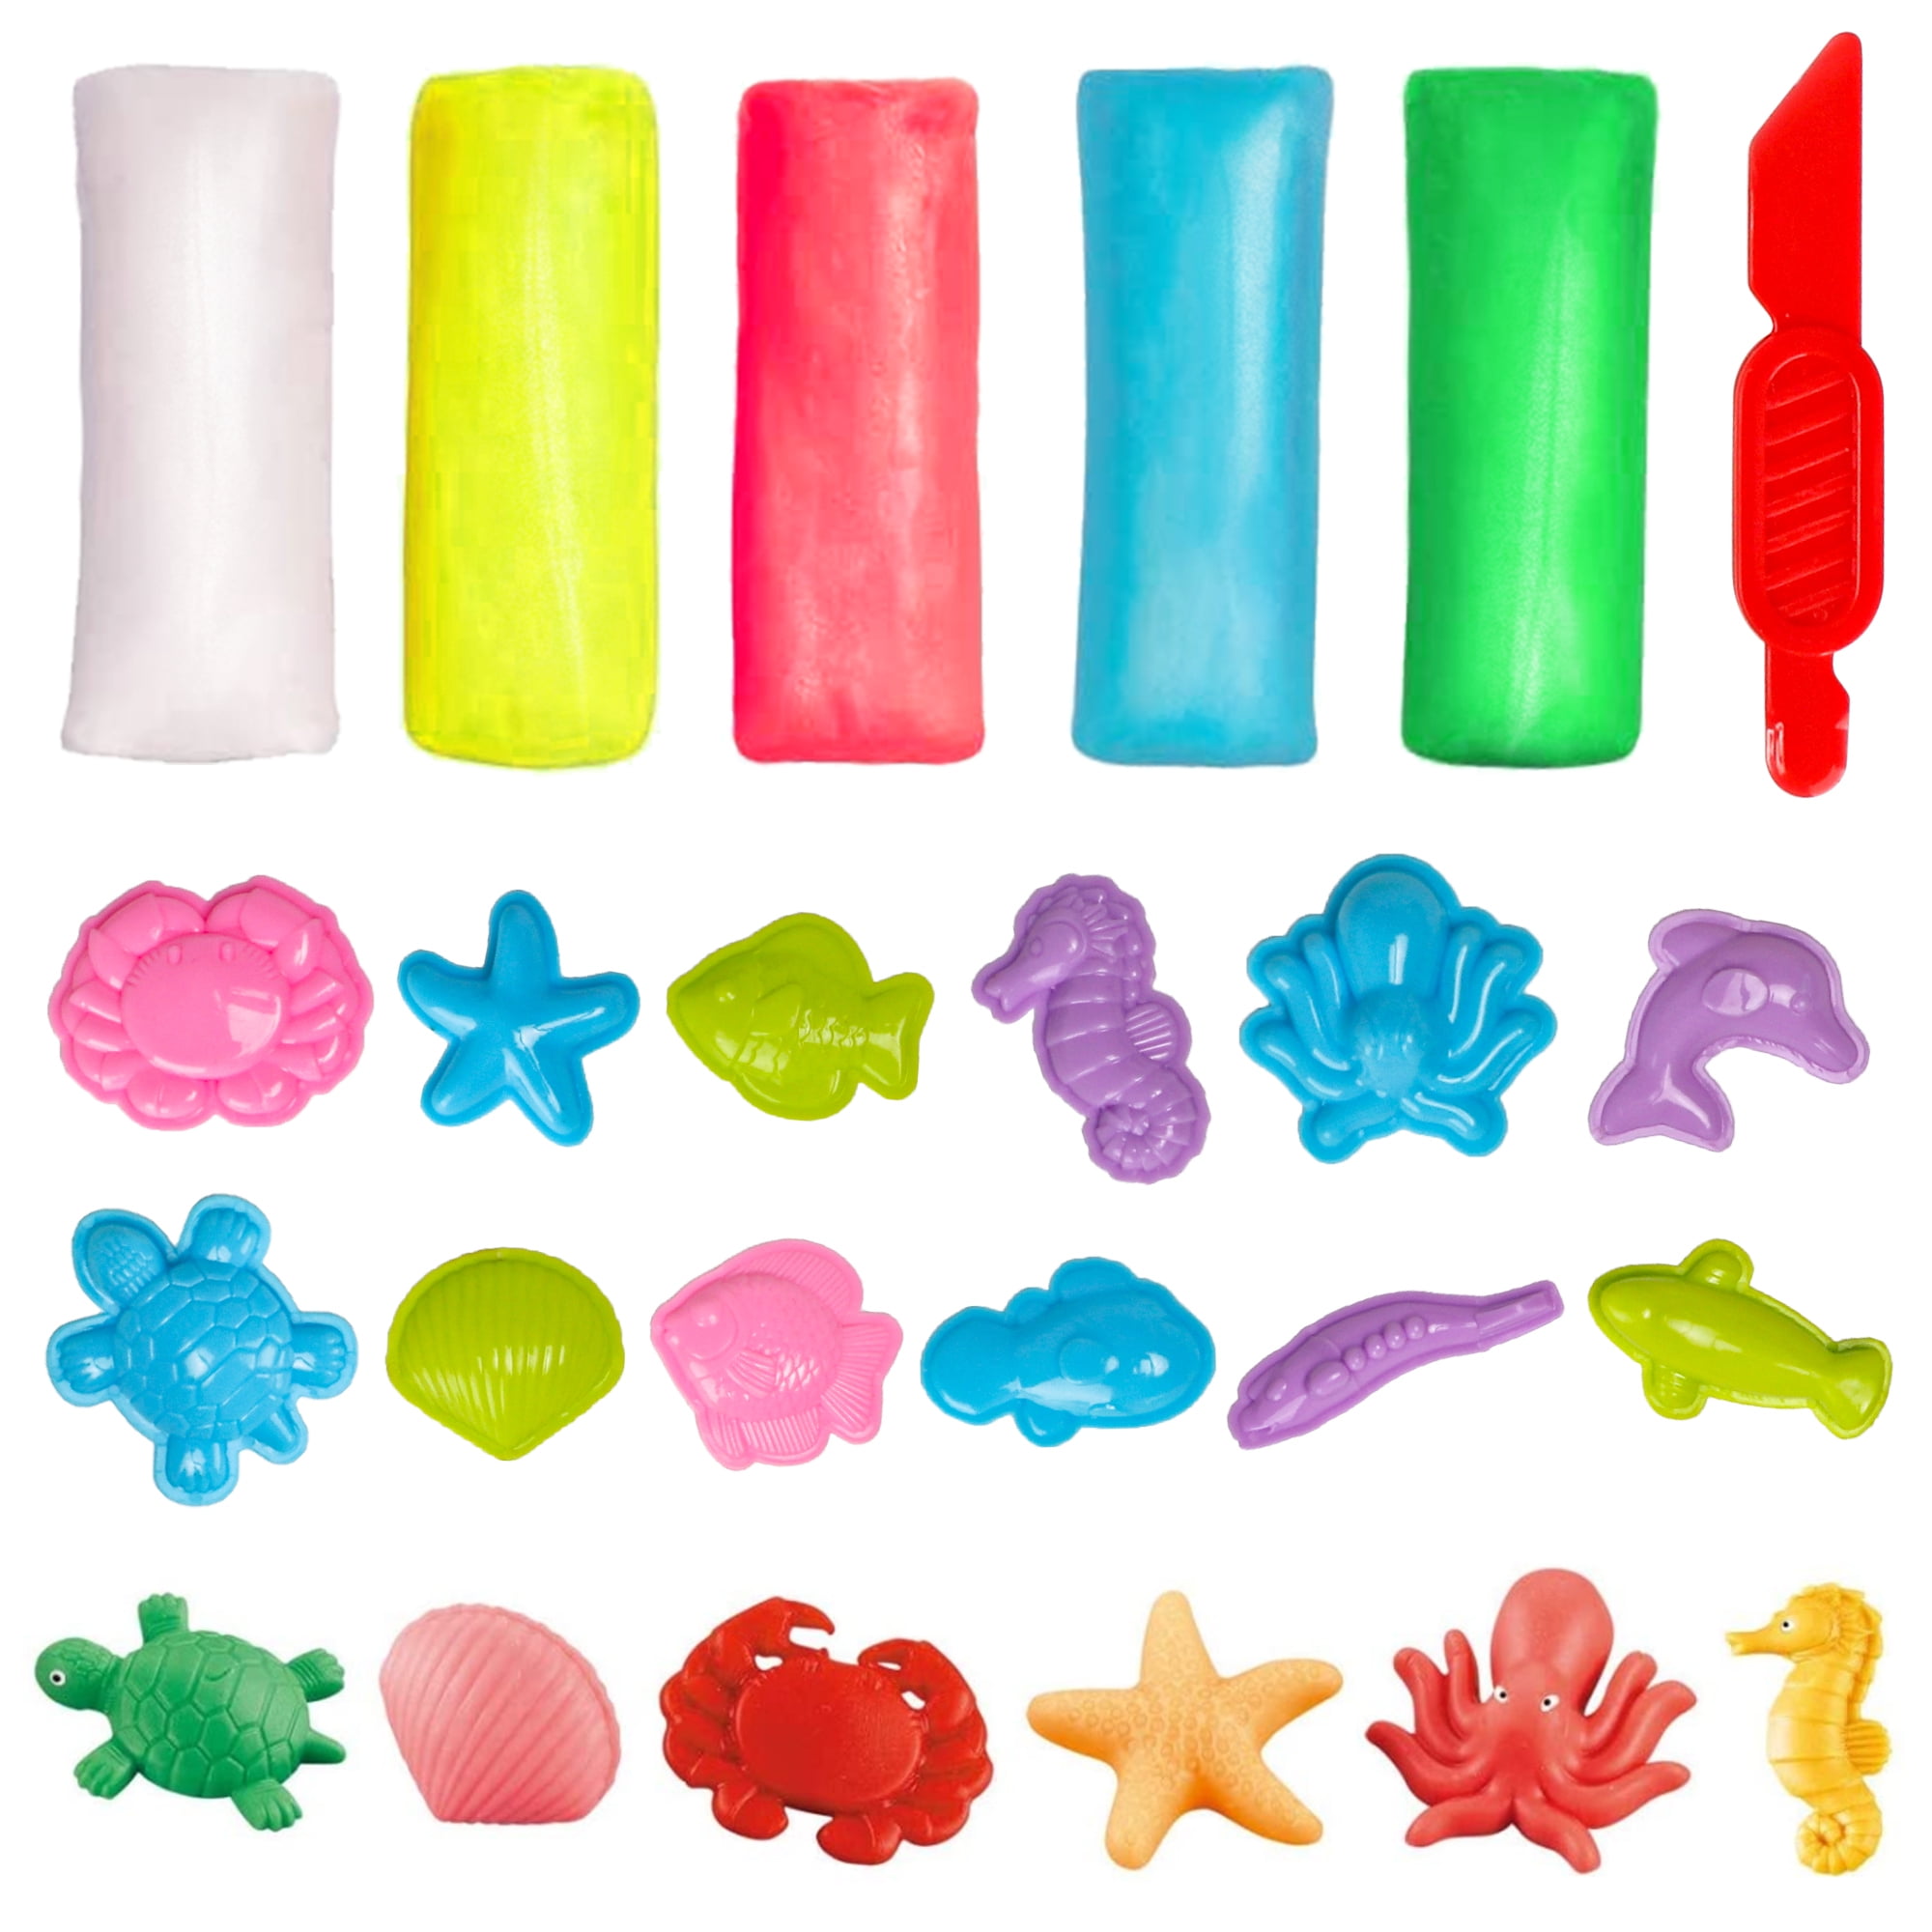  Original Stationery Soft Clay for Slime Supplies, Modeling Foam  Clay & White Clay for Kids, Add to Glue & Shaving Foam to Make Butter Slime,1.3  Lbs/600G : Toys & Games